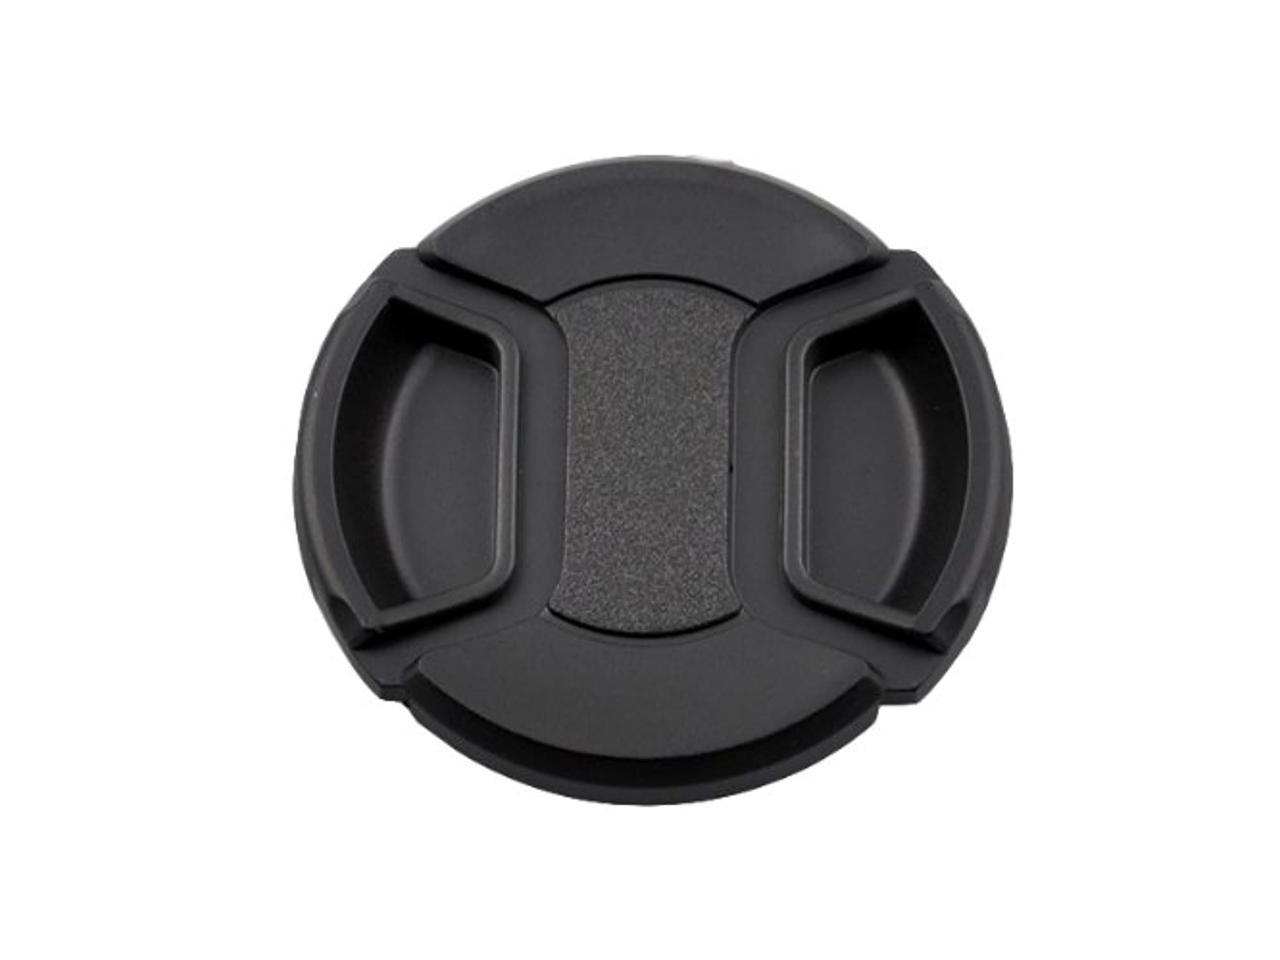 55mm Lens Cap Snap-on Central Front Splint Front Cover Lens Cap for Canon Nikon Sony Olympus Digital SLR Cameras and Other 55mm Filter Line Camera Lenses 